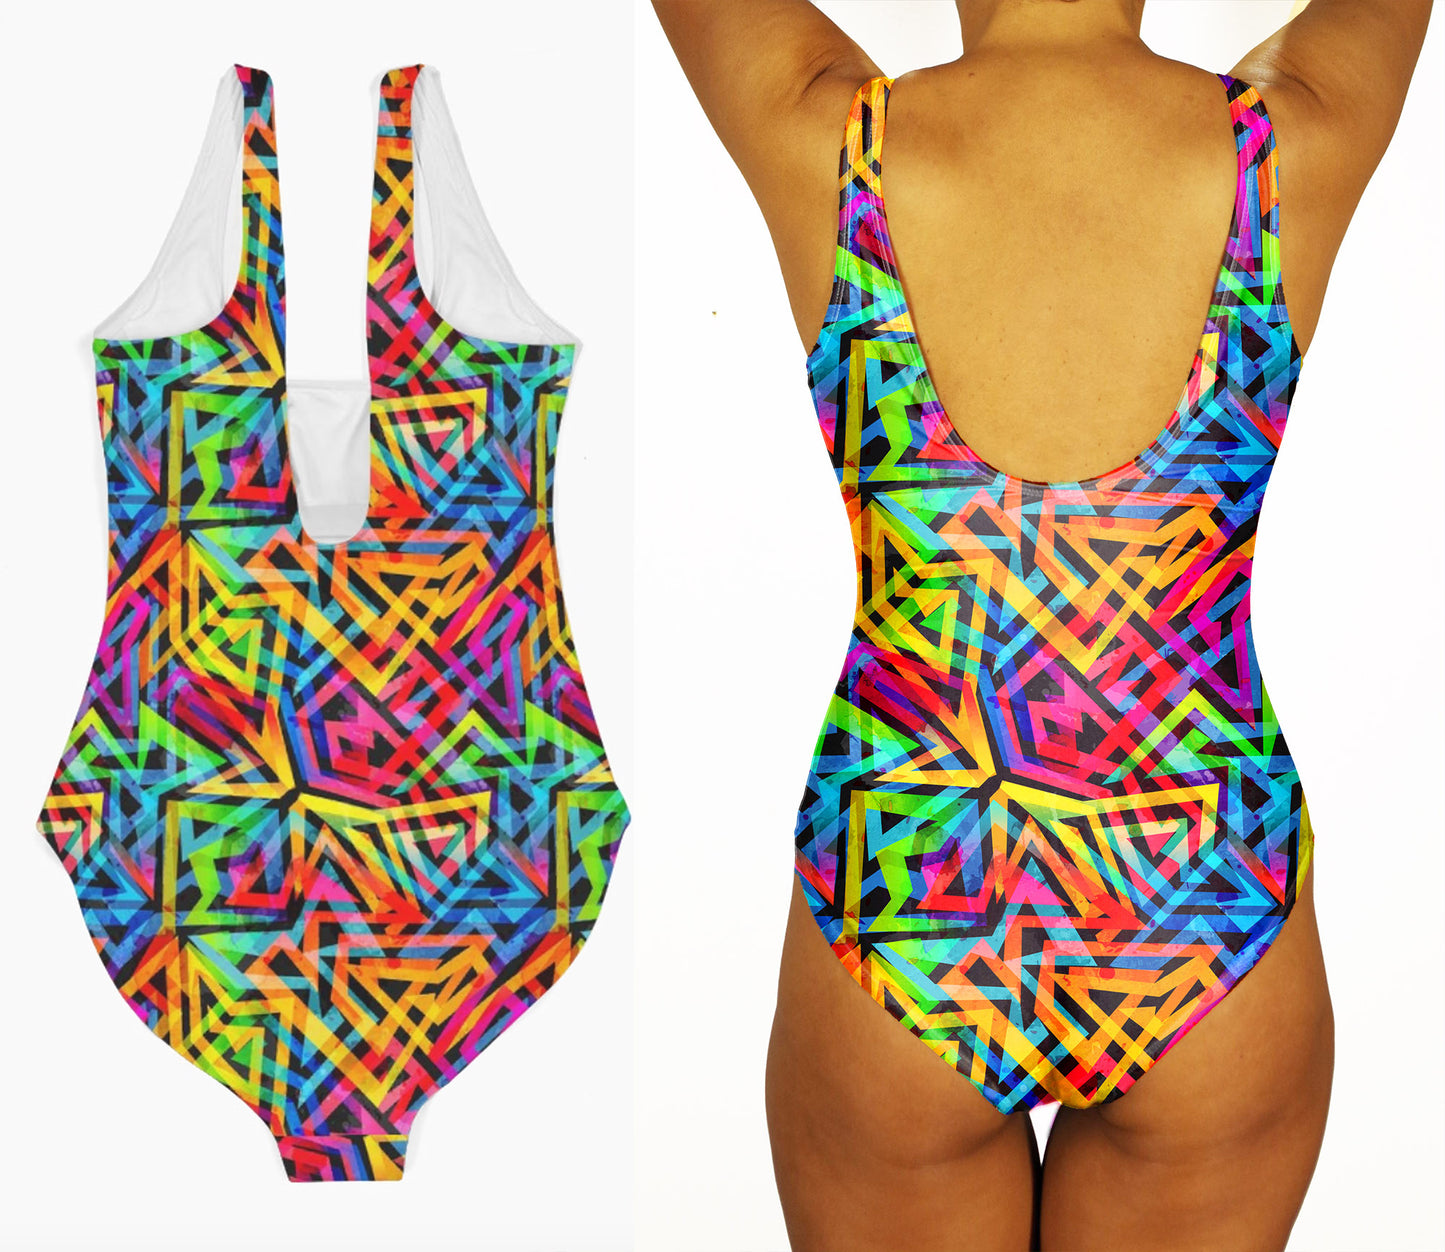 80s/90s Graffiti Print Festival One Piece Swimsuit:  Rave Outfits